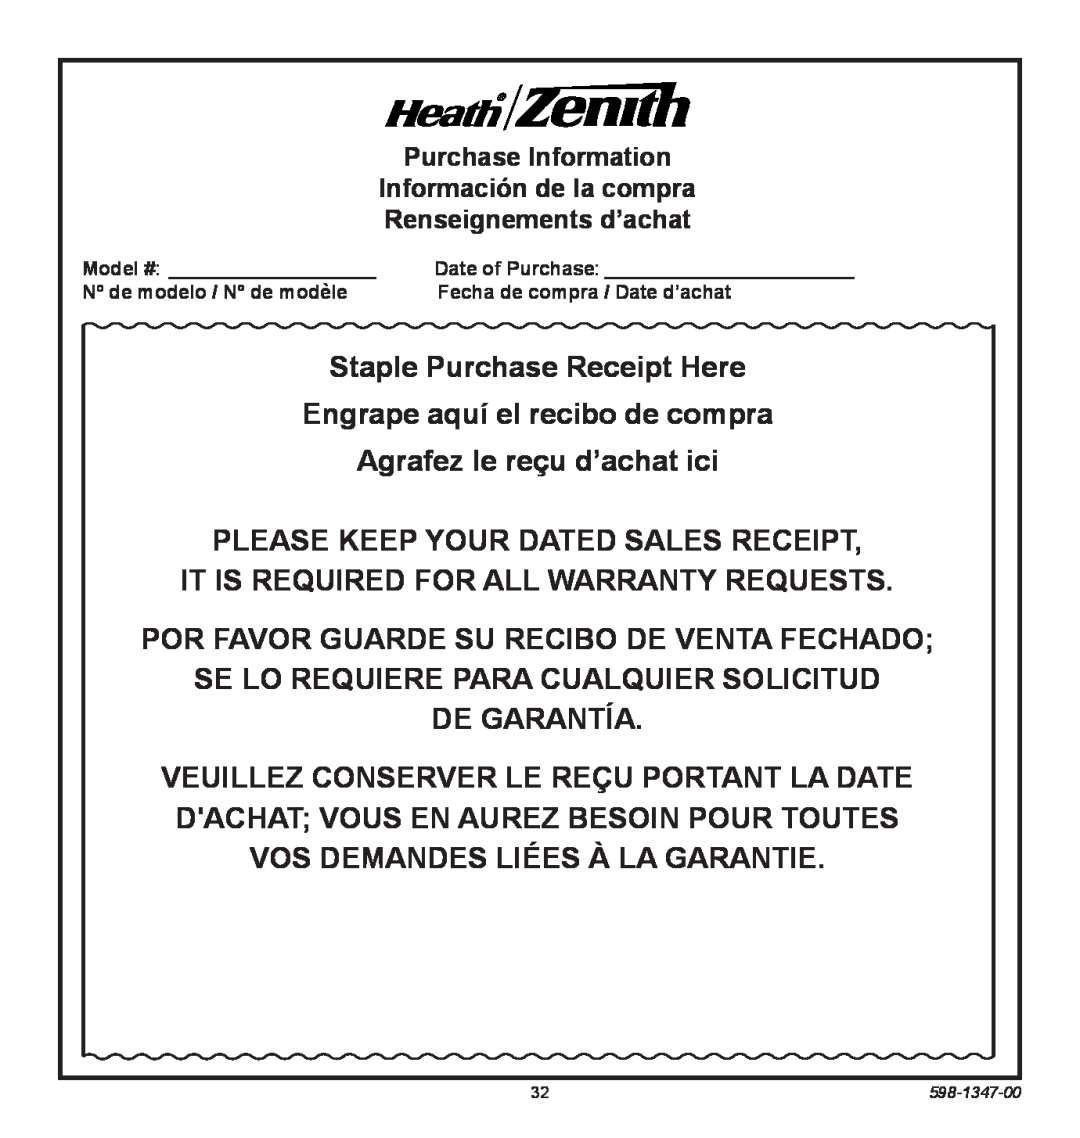 Heath Zenith 598-1347-00 operating instructions Staple Purchase Receipt Here 